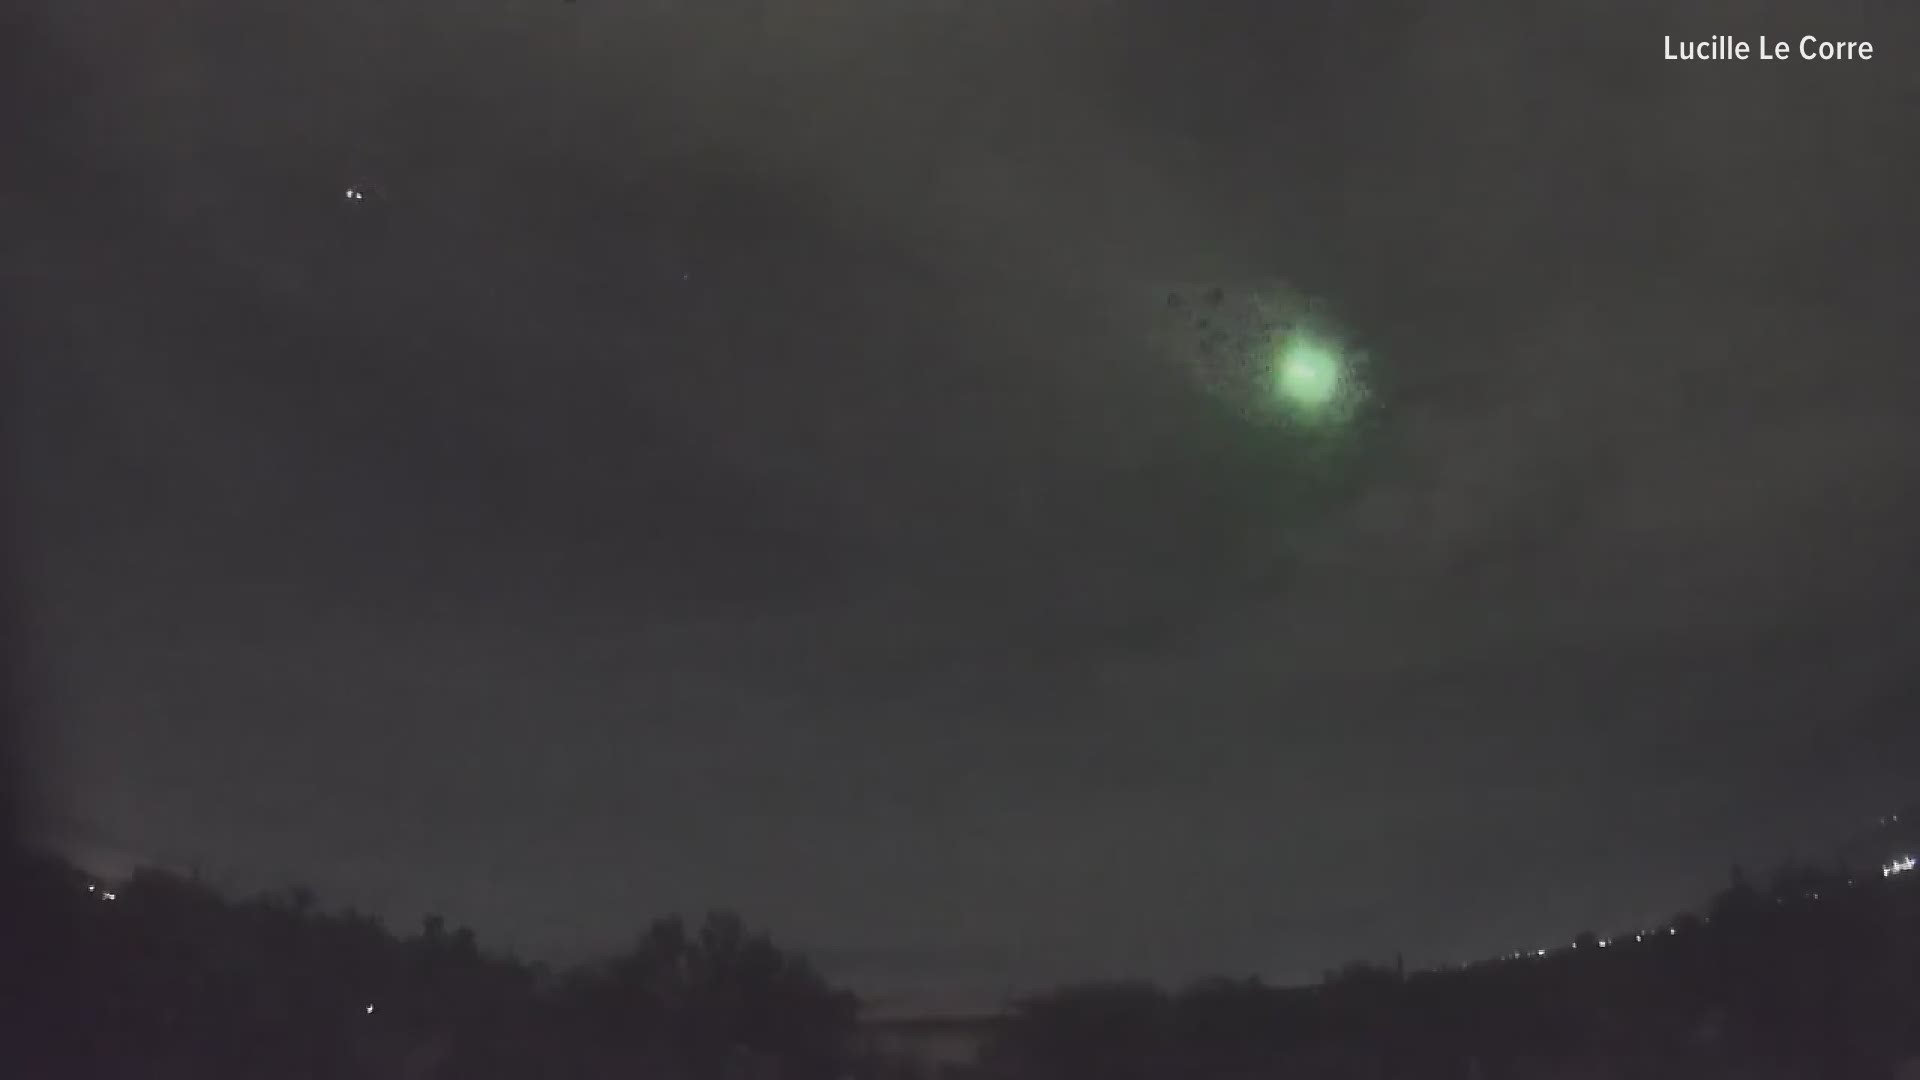 A rooftop camera belonging to Dr. Lucille Le Corre, a planetary scientist at the Planetary Science Institute in Tucson, captured a fireball streaking across the sky.